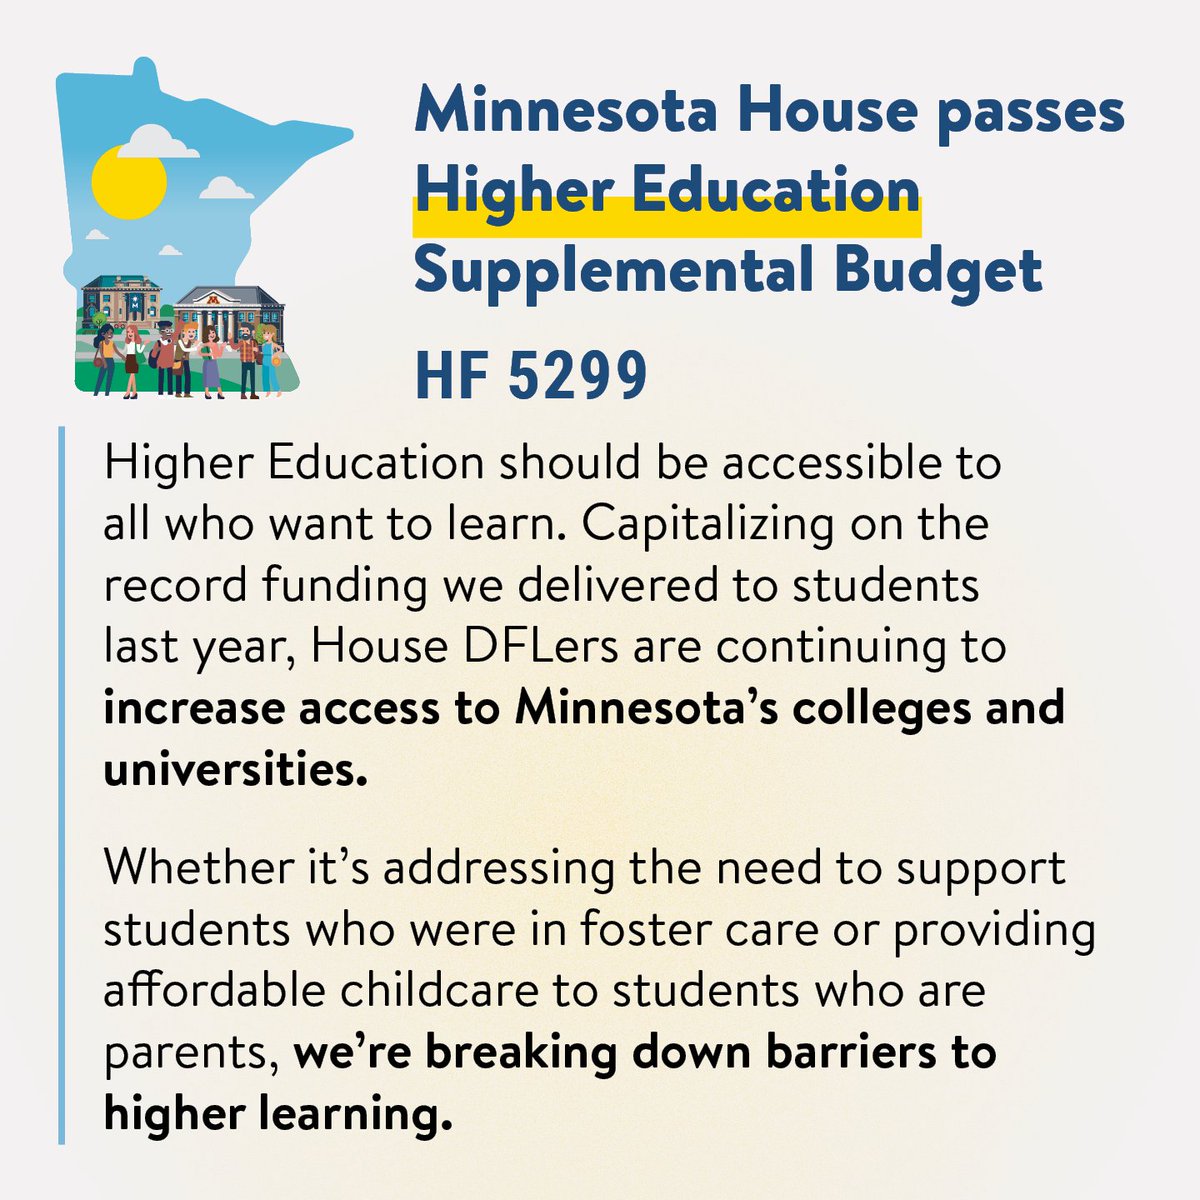 House Democrats are continuing to make college and career training affordable, accessible, and prepare students for tomorrow's workforce. Our Higher Education budget supports students who were in foster care, childcare for students, ALS research, and much more. 🎓 🔬📚#mnleg